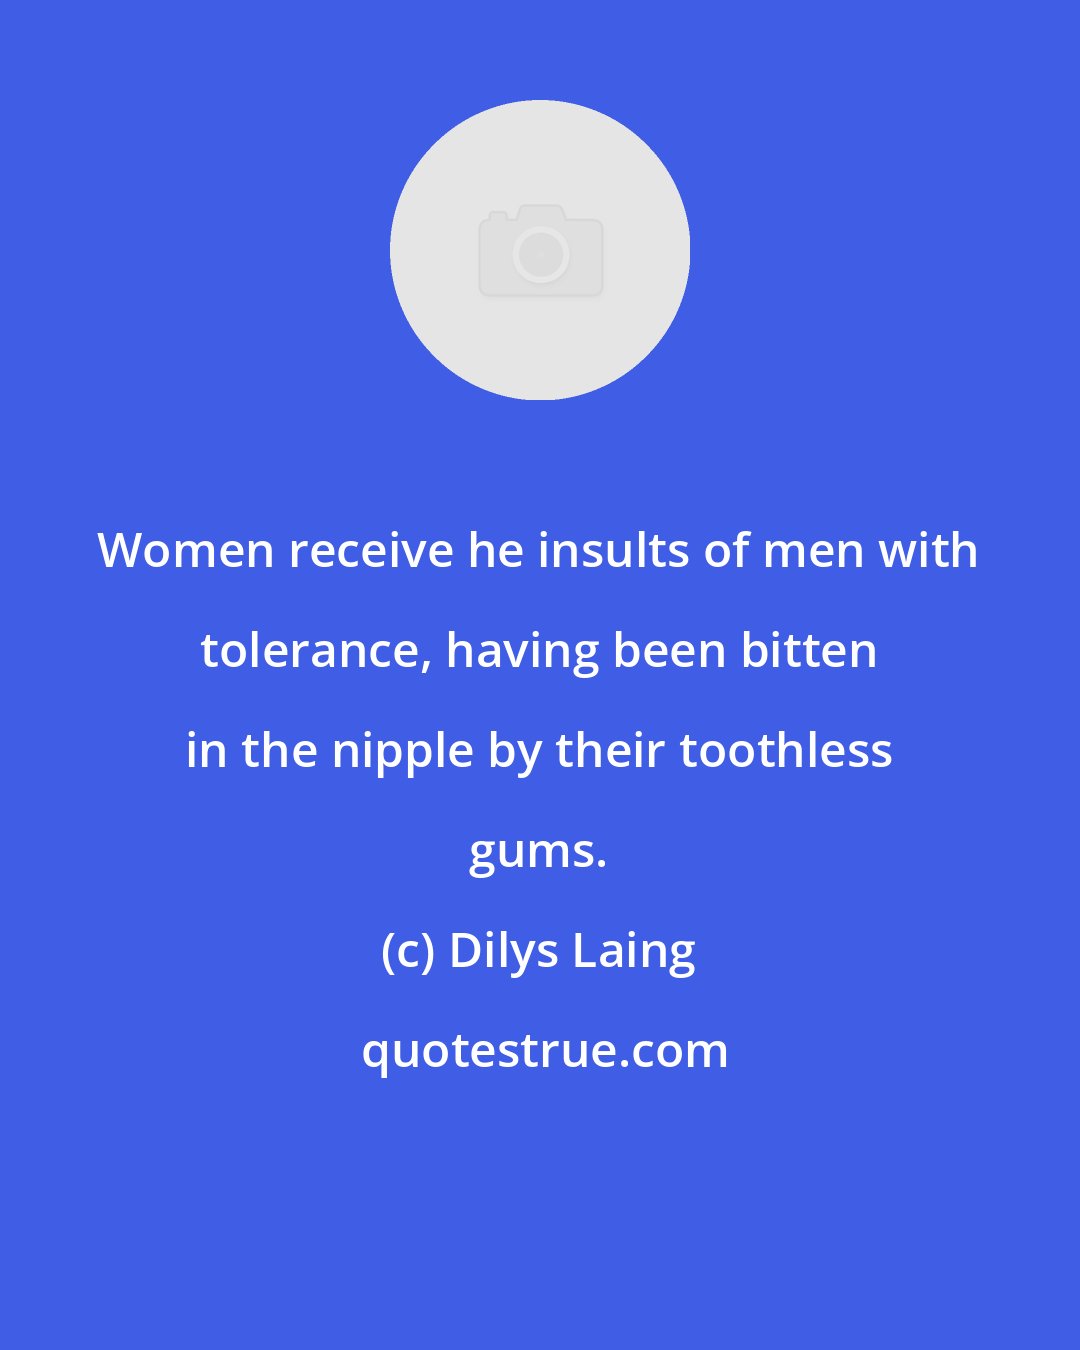 Dilys Laing: Women receive he insults of men with tolerance, having been bitten in the nipple by their toothless gums.